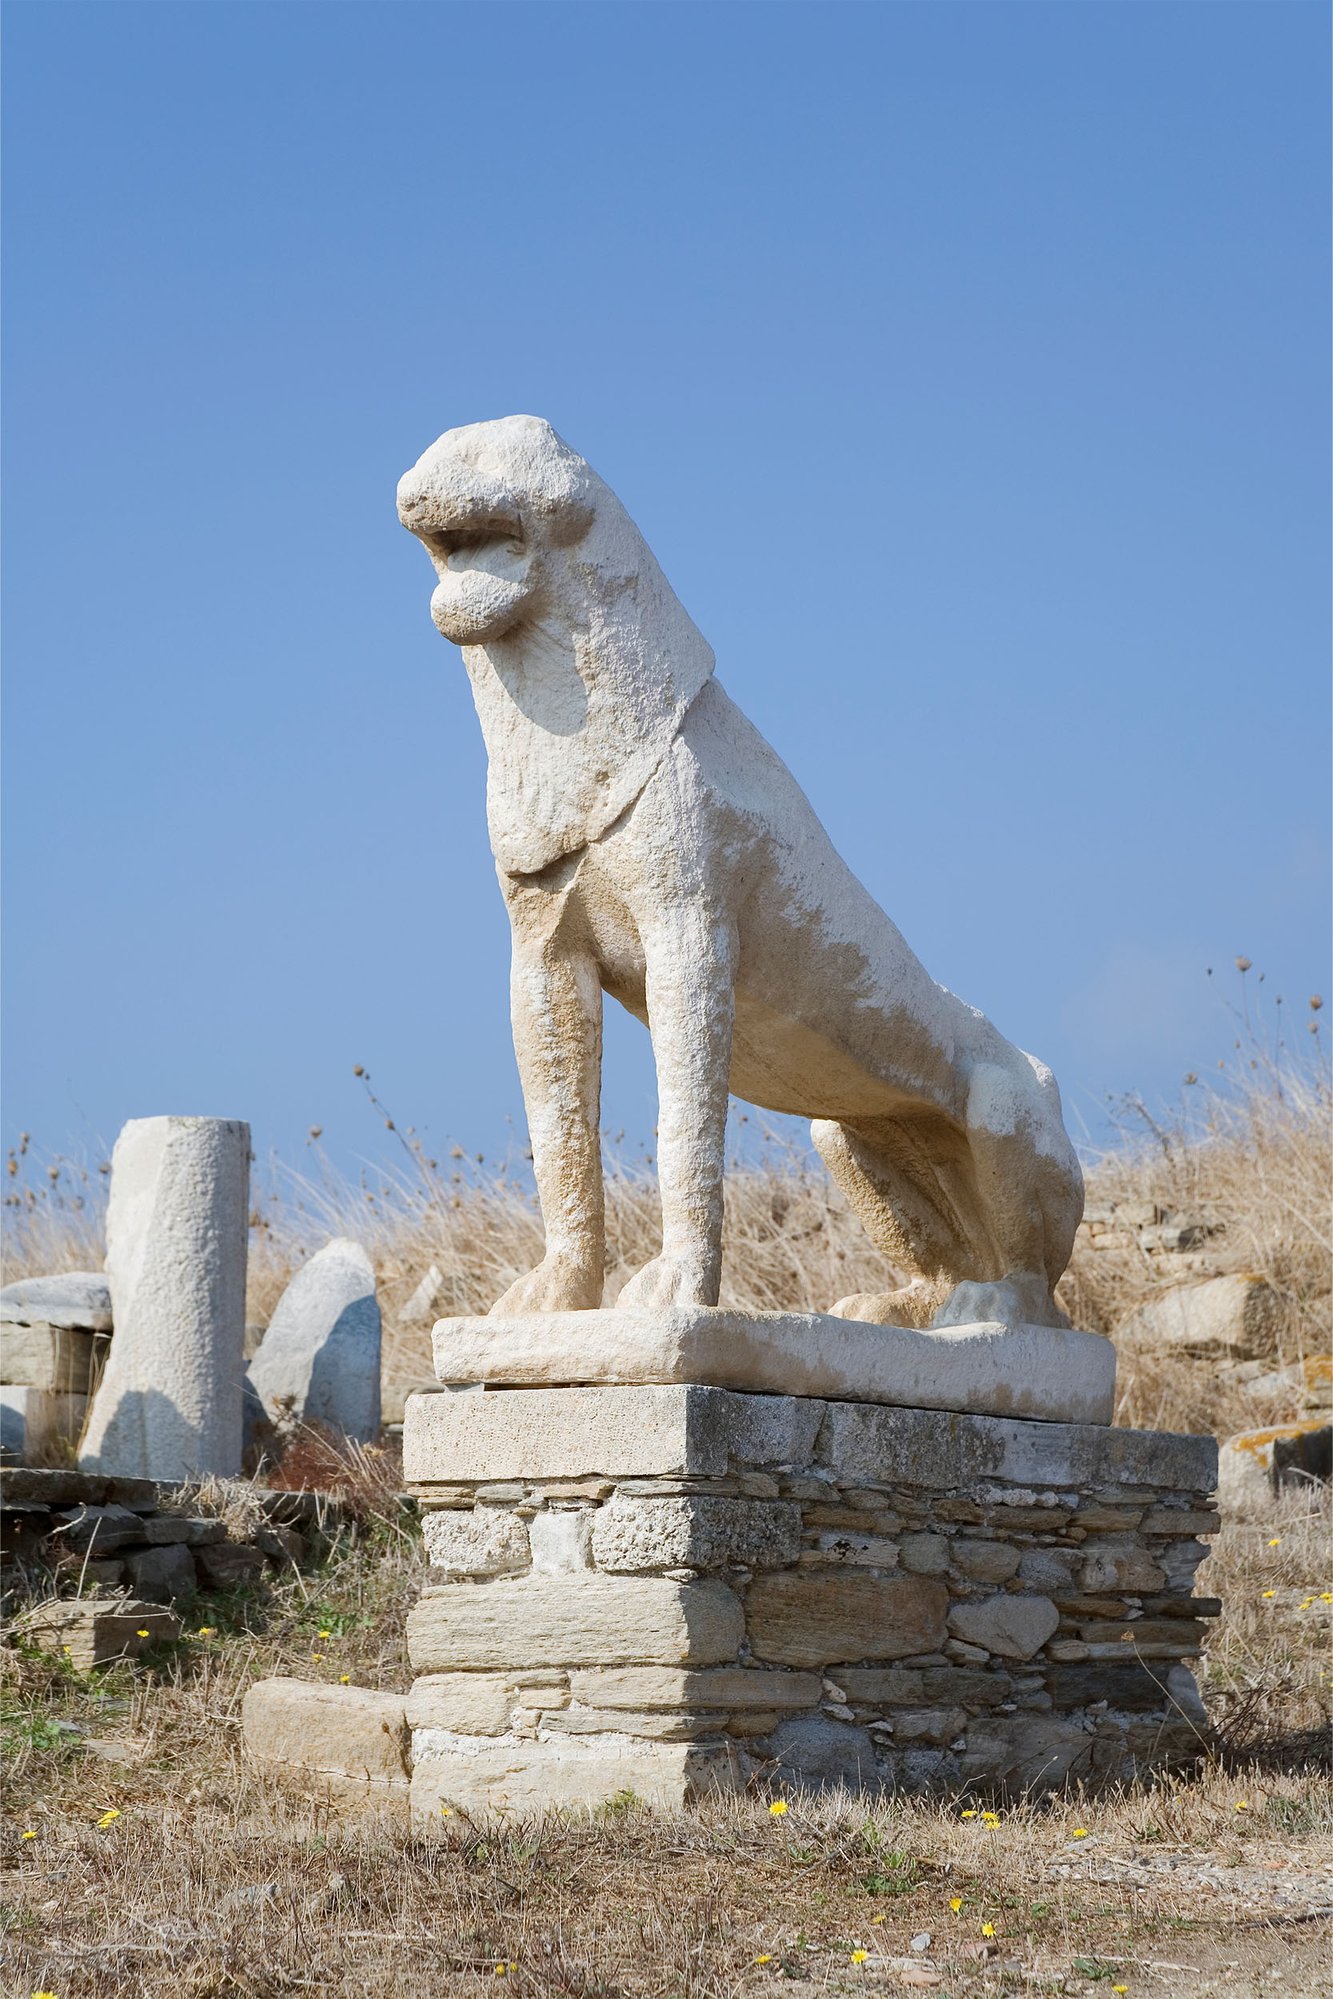 The mysterious island of Delos, Greece